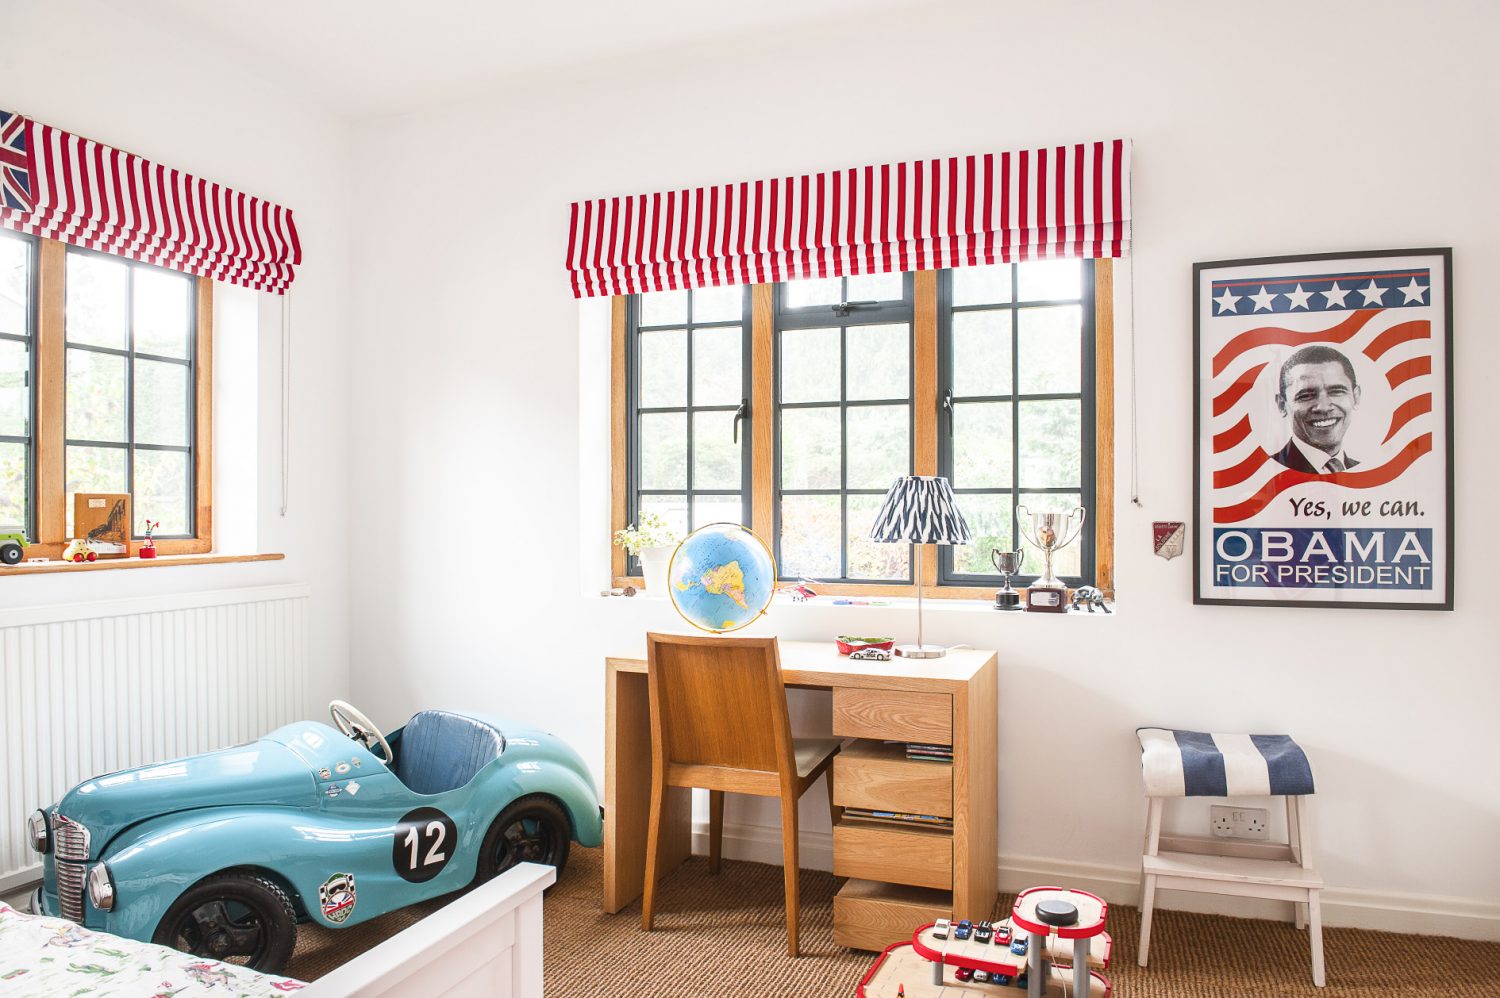 Kate and Jason’s son Joe chose most of the items in his room, including the Obama poster